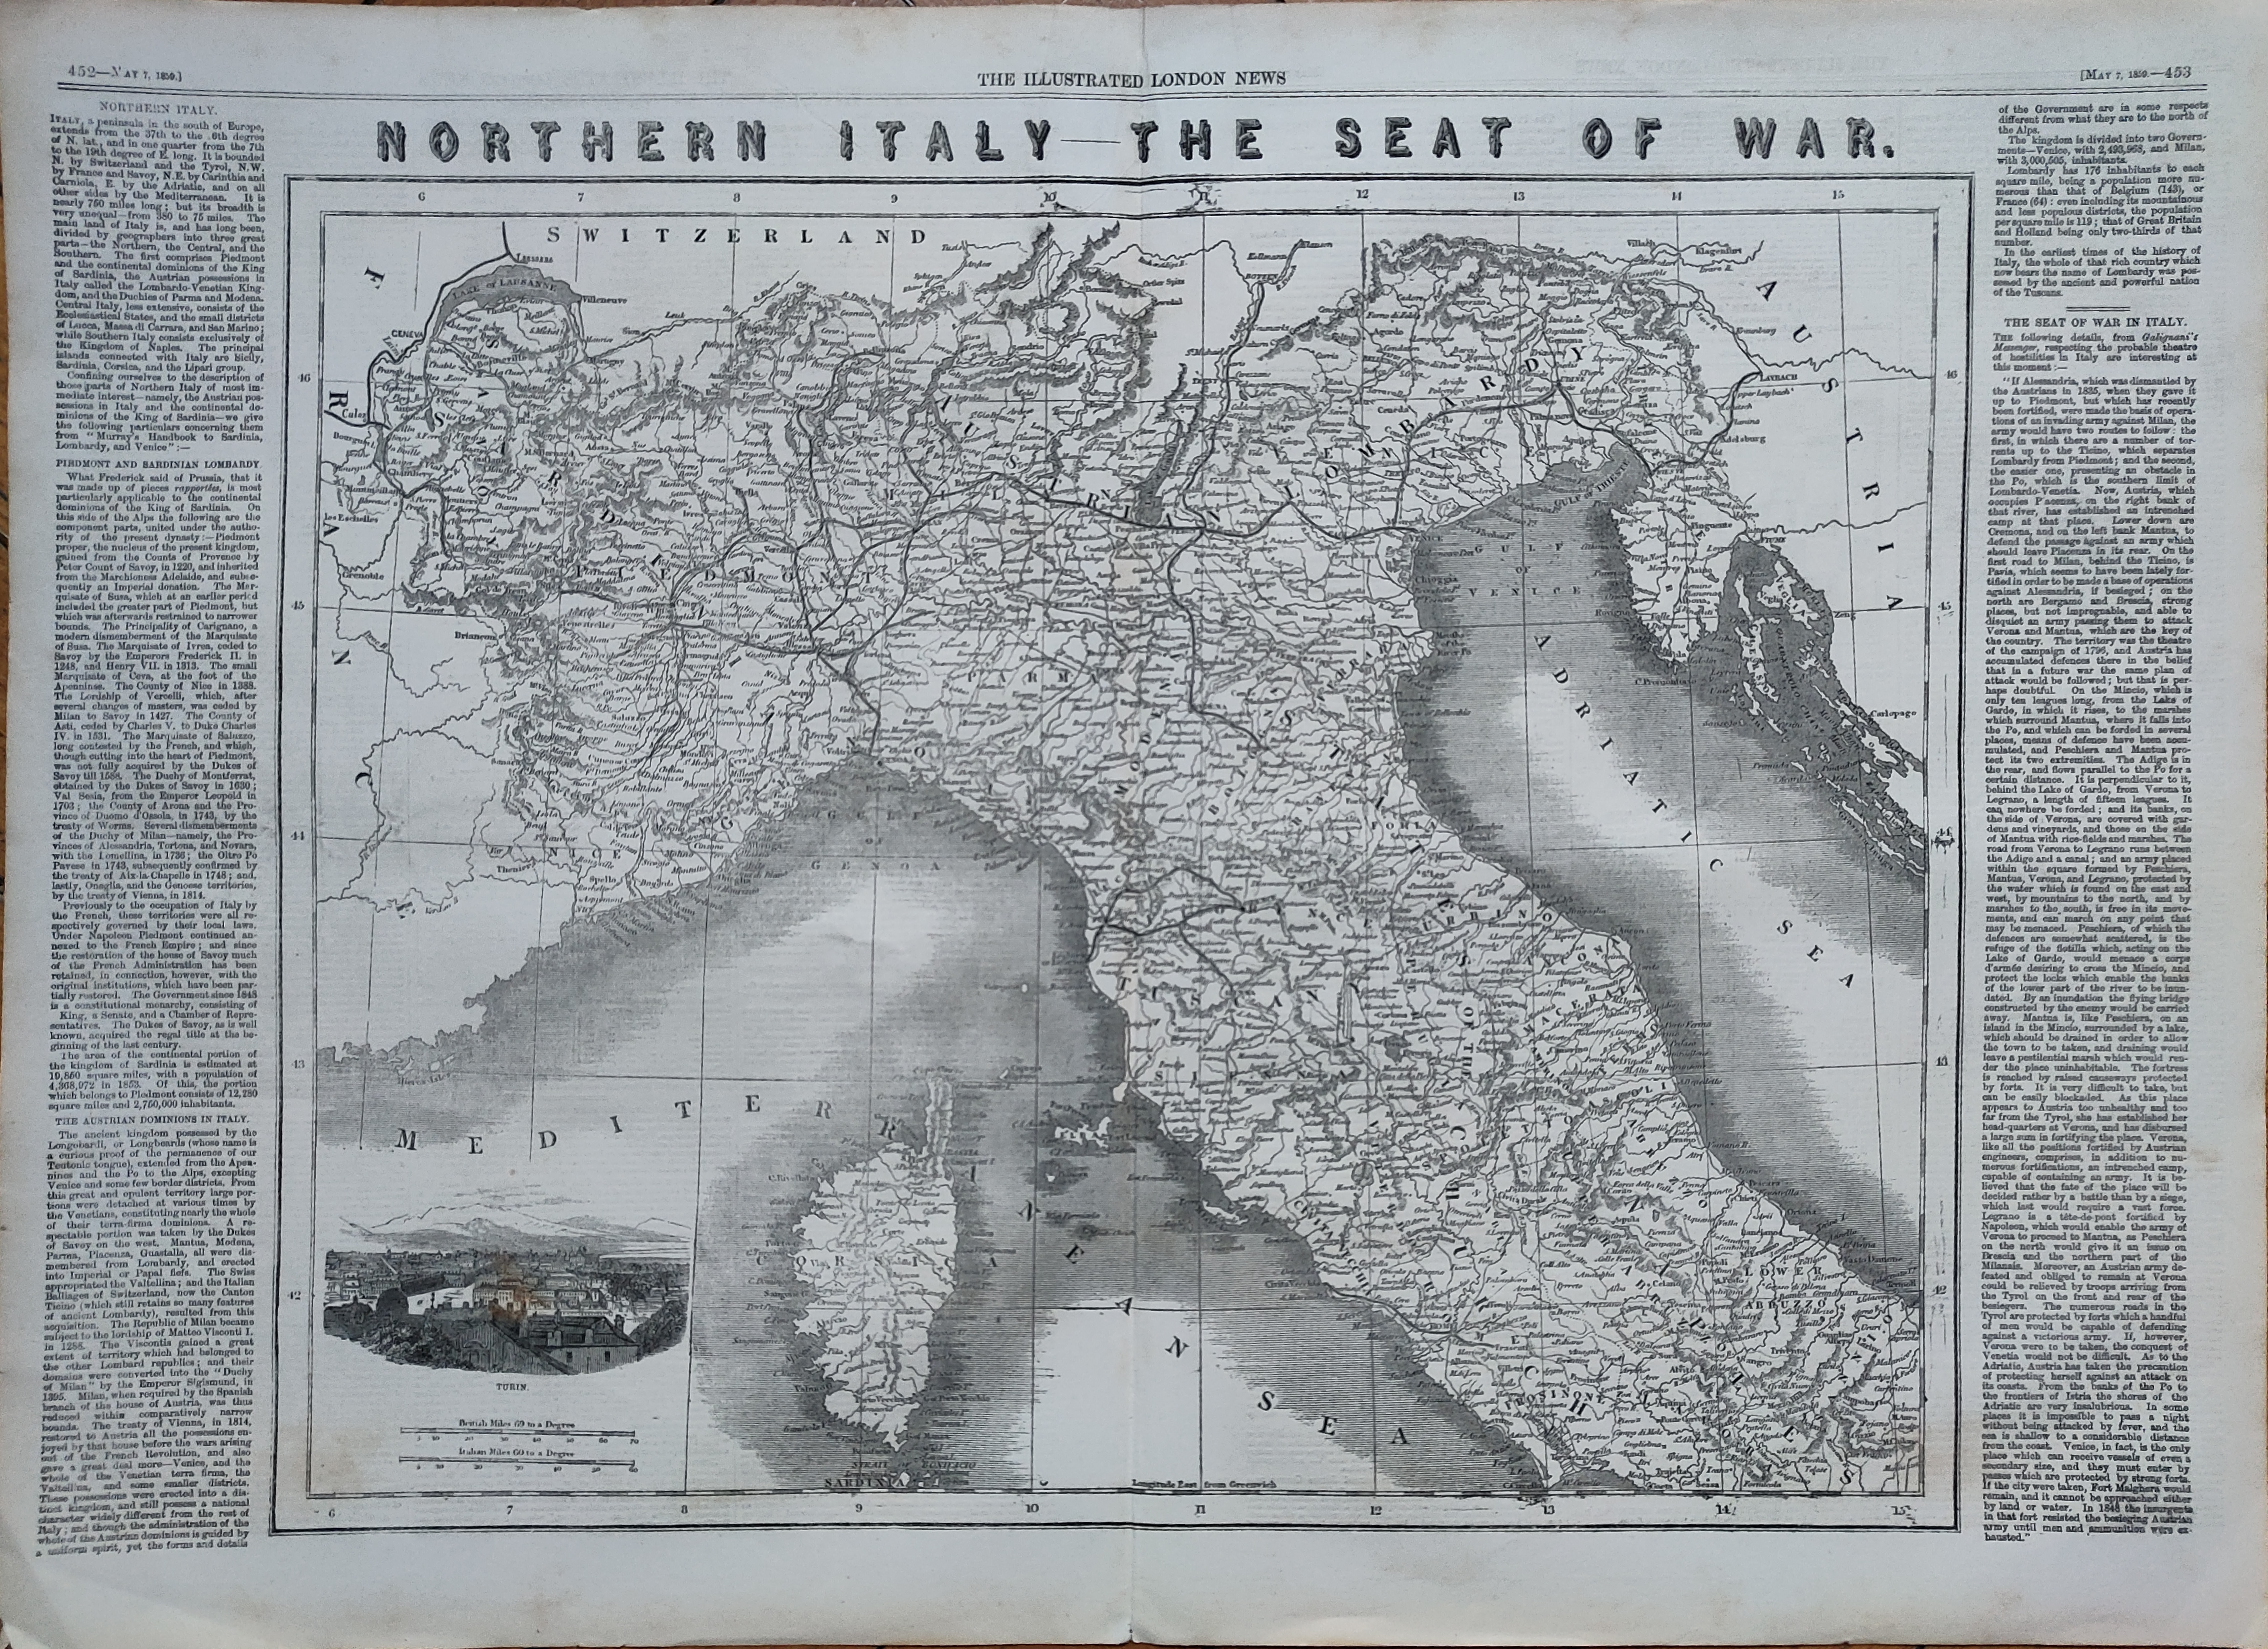 The northern Italy the seat of war